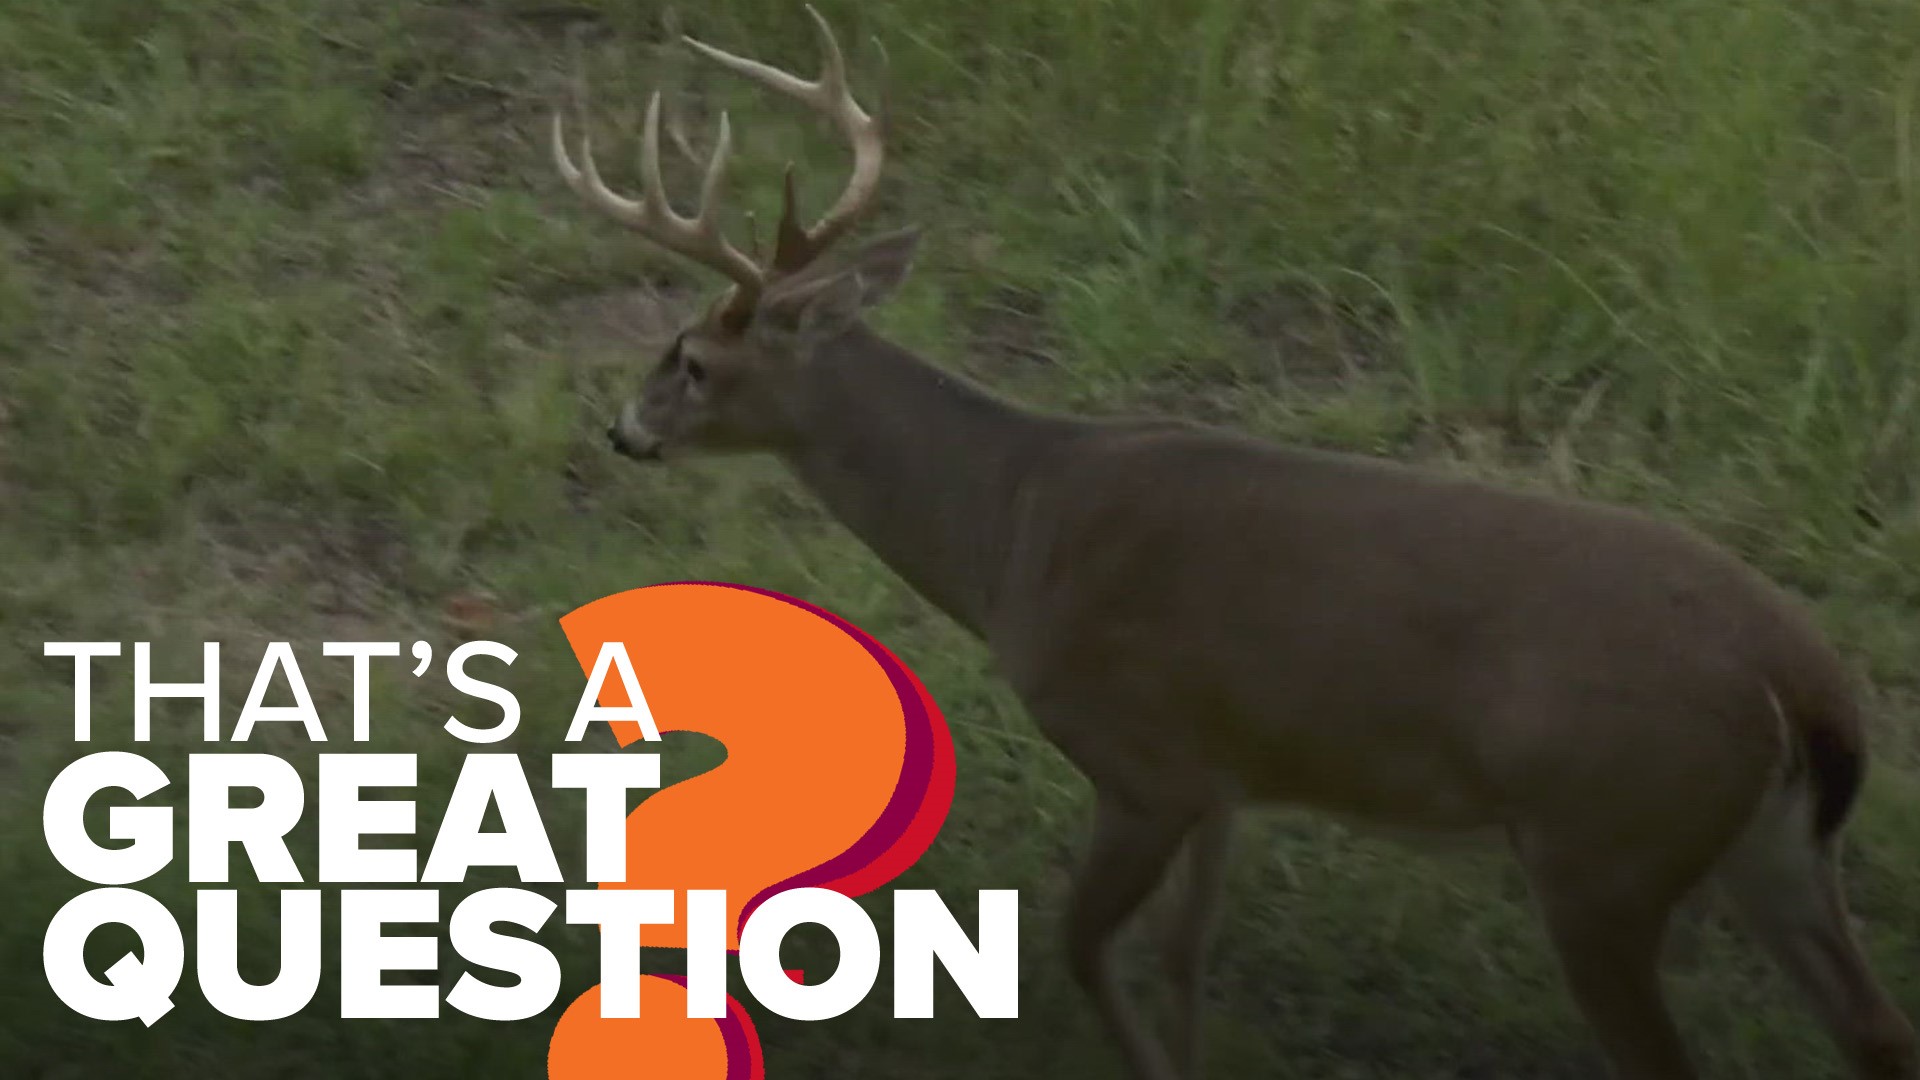 Arkansas and deer hunting go hand in hand— but what's the biggest buck ever killed in the state?